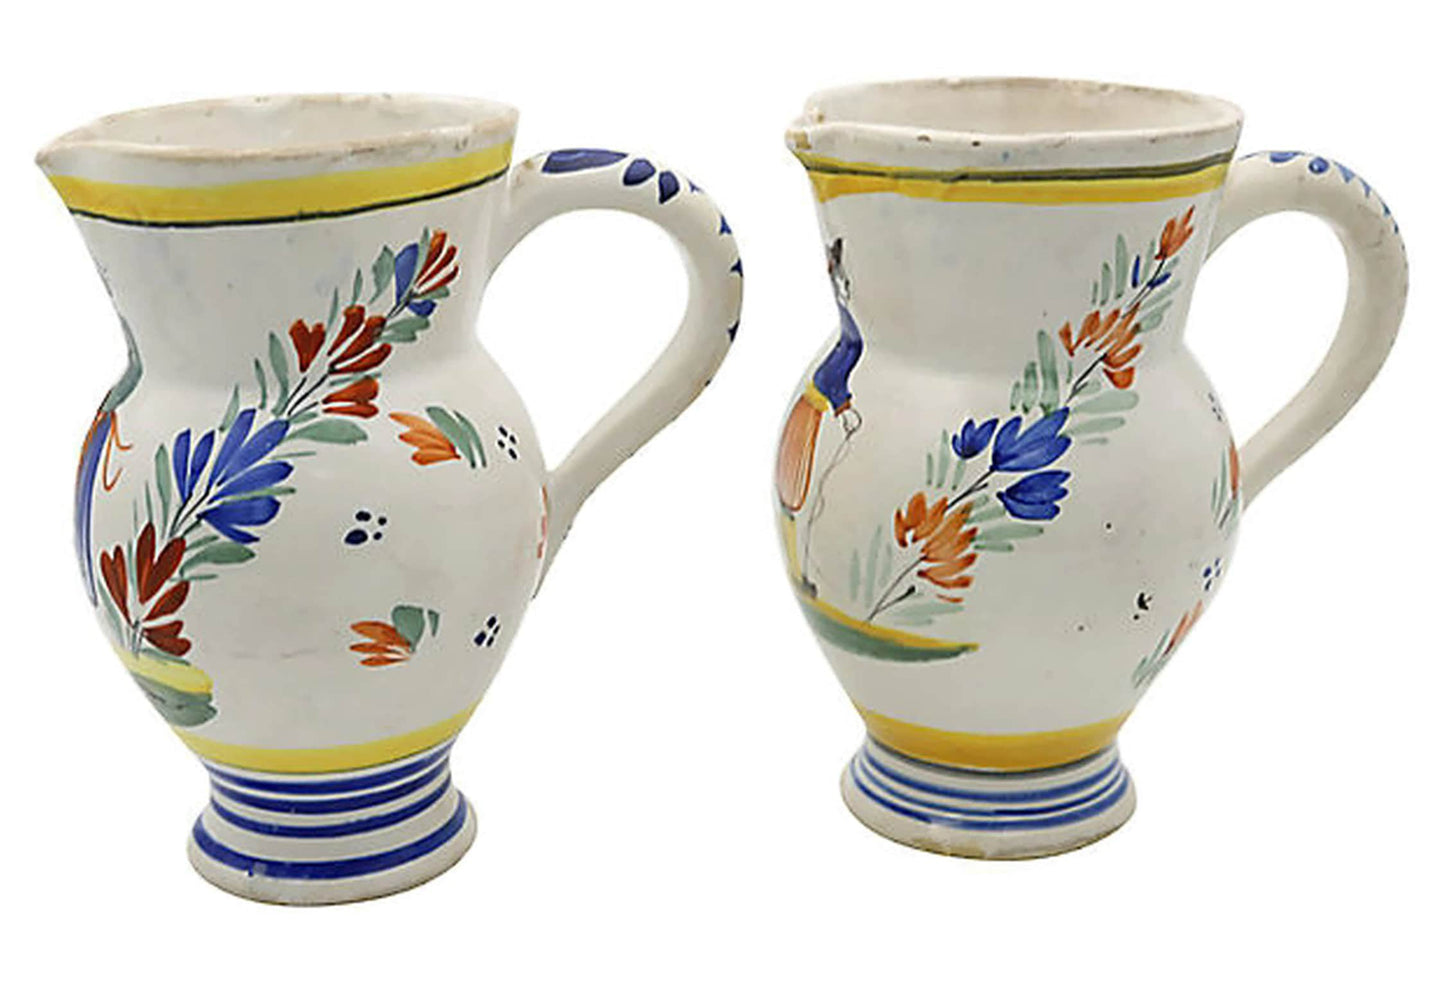 1930s French Quimper Faience Pitchers - A Pair